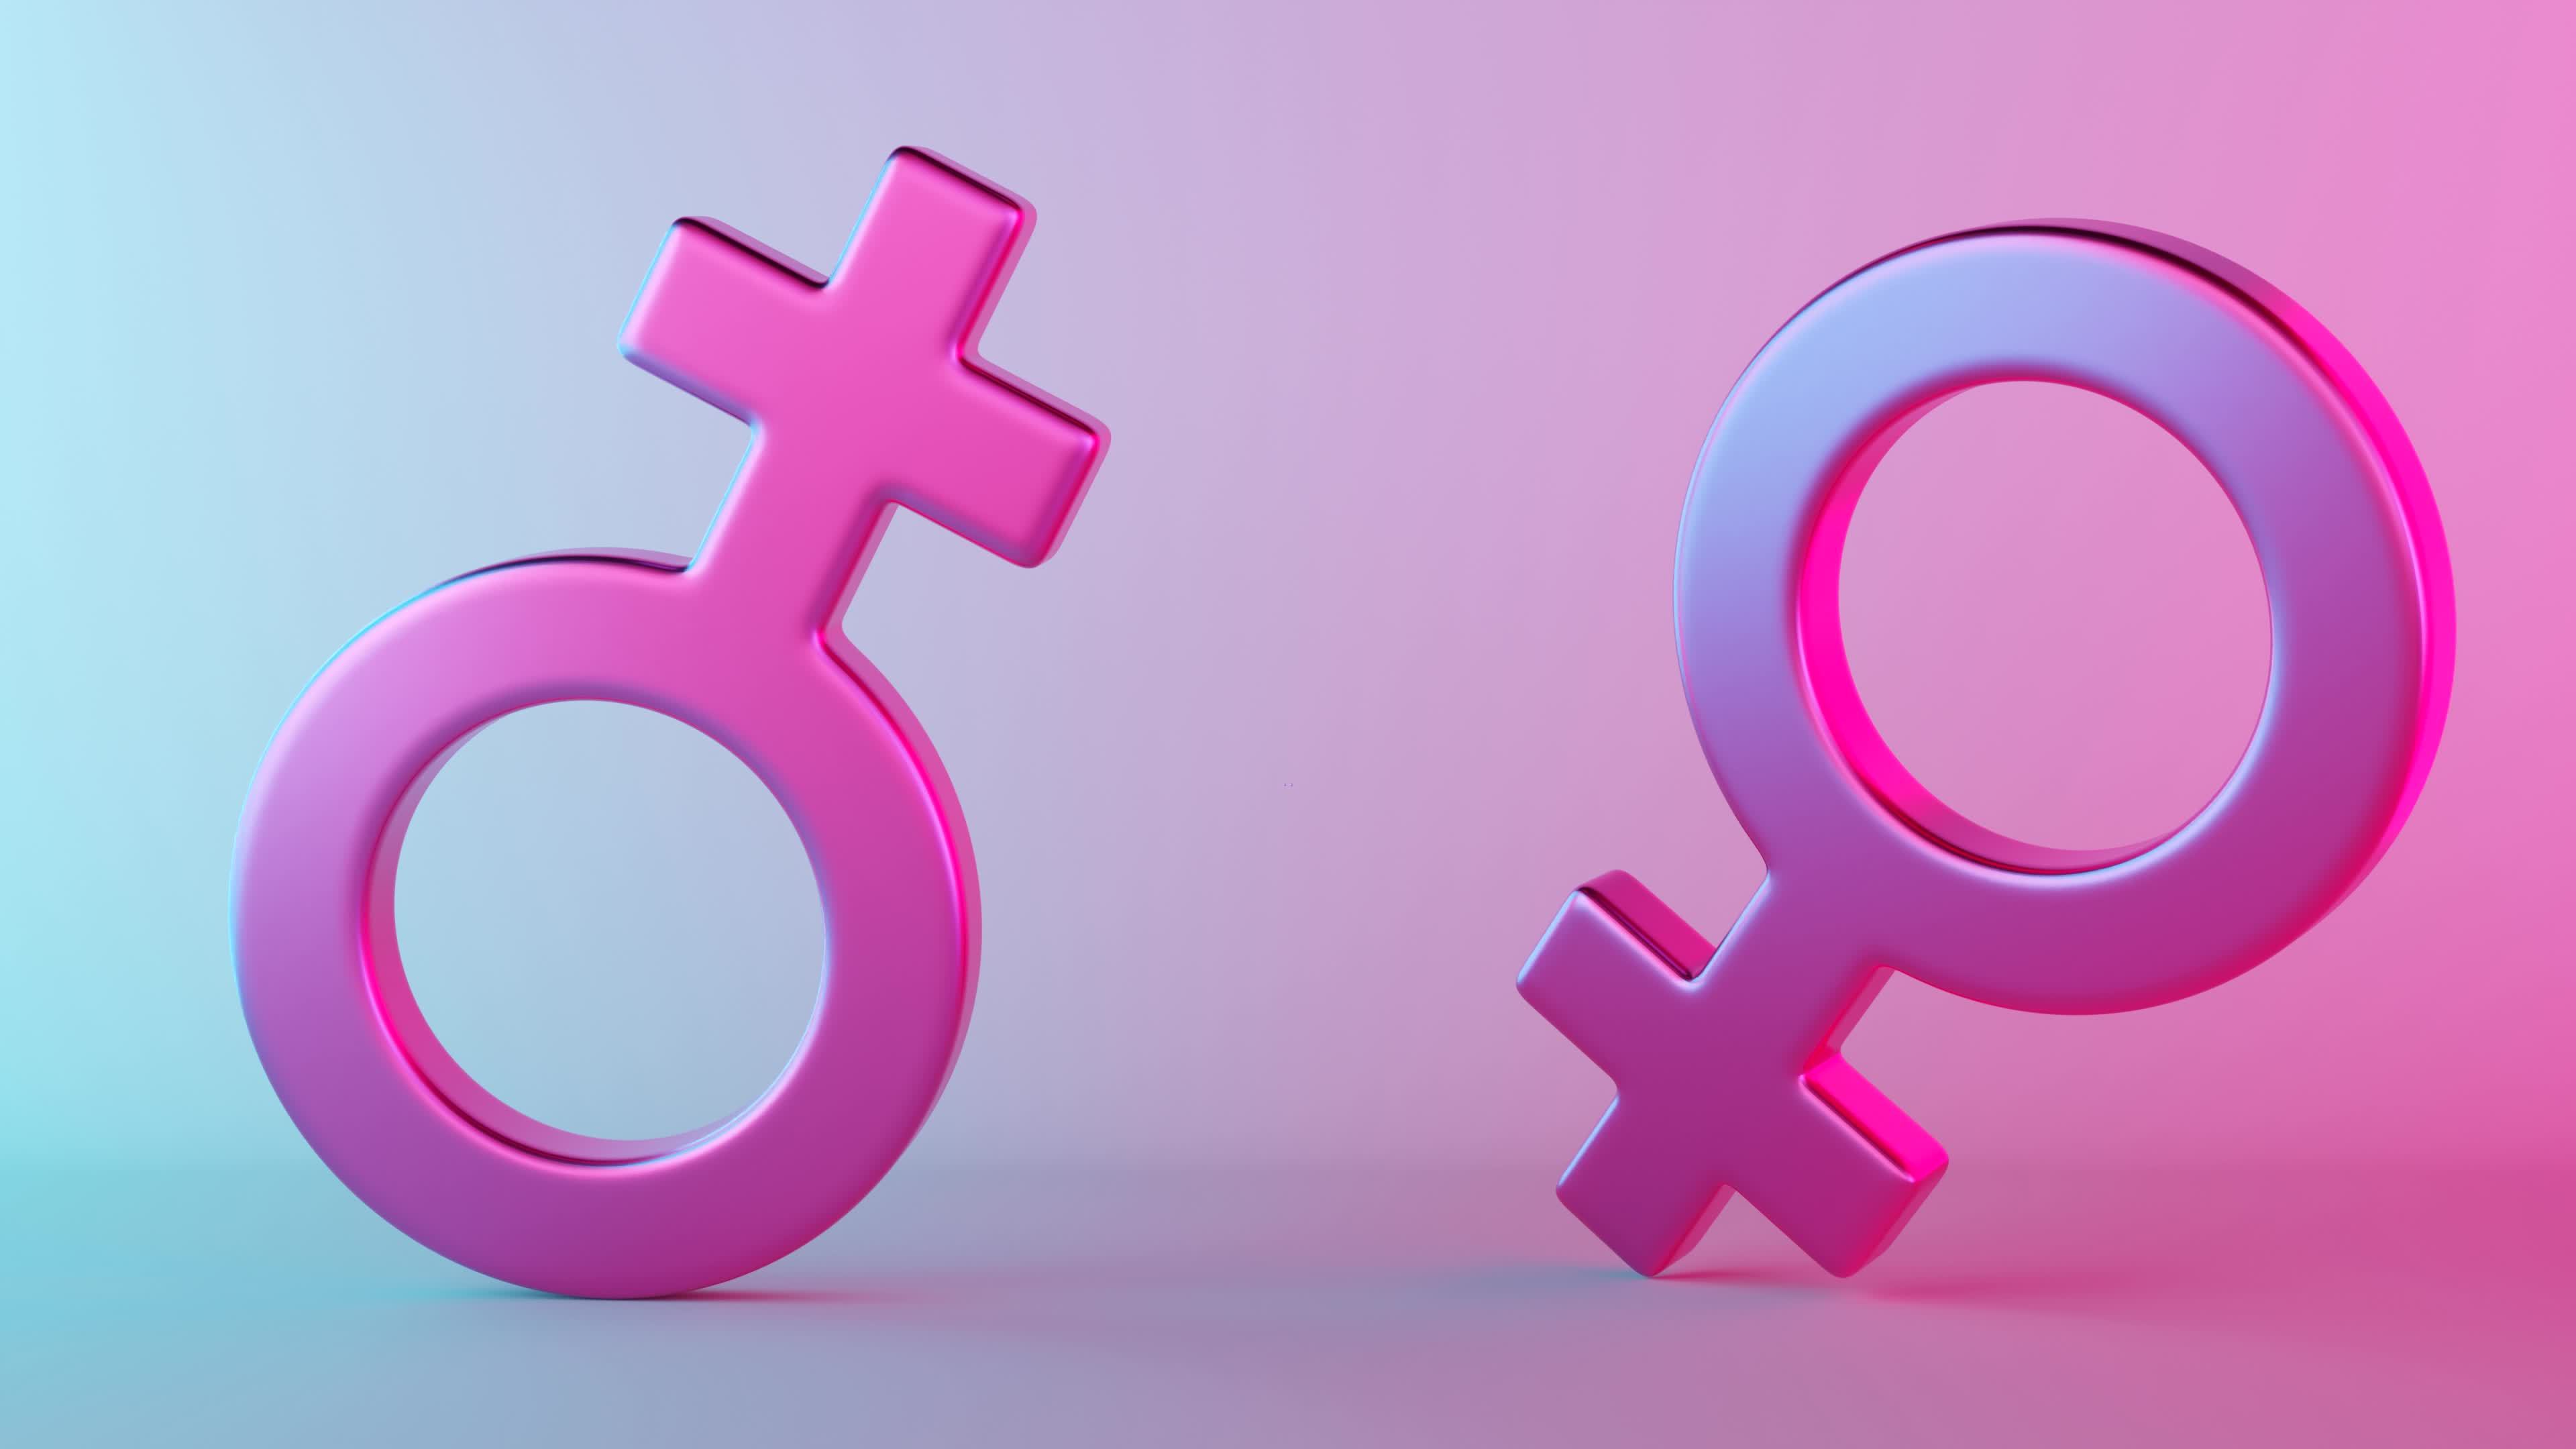 Two female sex symbols with heart and neon light. Venus symbol for women. Gender sign. Love, LGBT community. Lesbians couple, relationship. Diversity, homosexuality, equal marriage picture picture